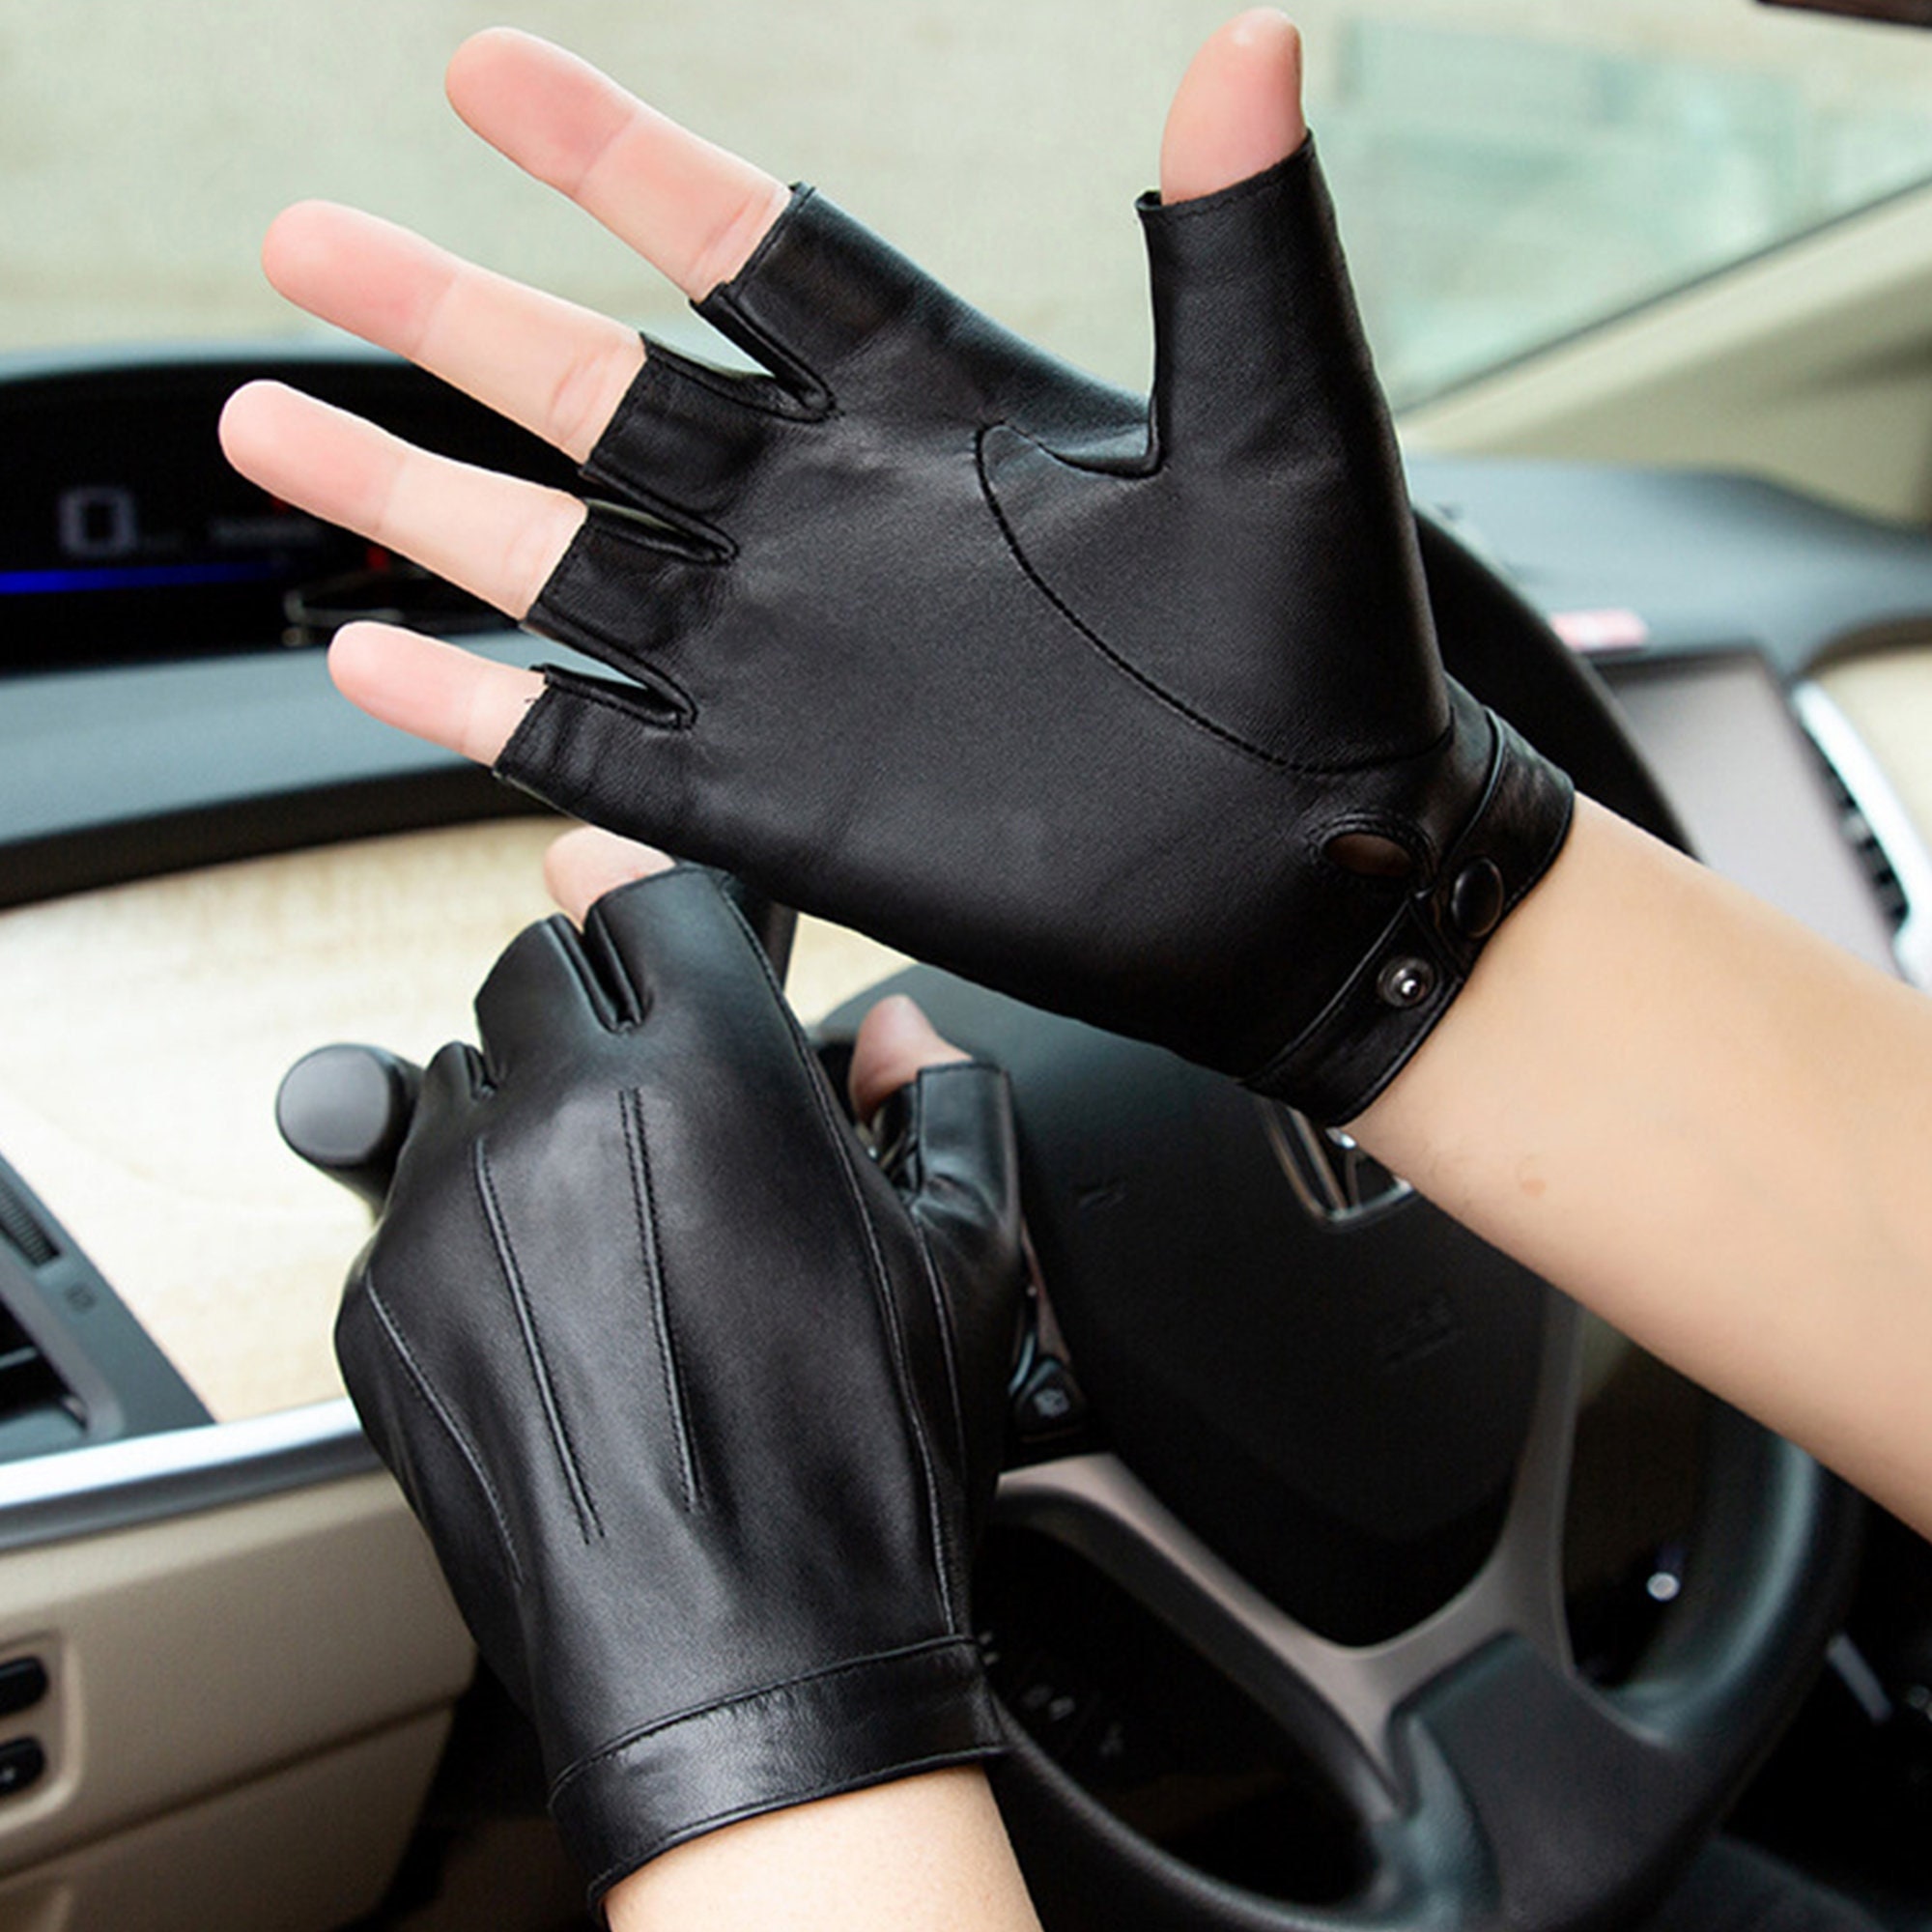 NEW MEN'S DRIVING GLOVES FINGER-LESS SKIN-FIT CHAUFFEUR LEATHER CLASSIC VINTAGE 